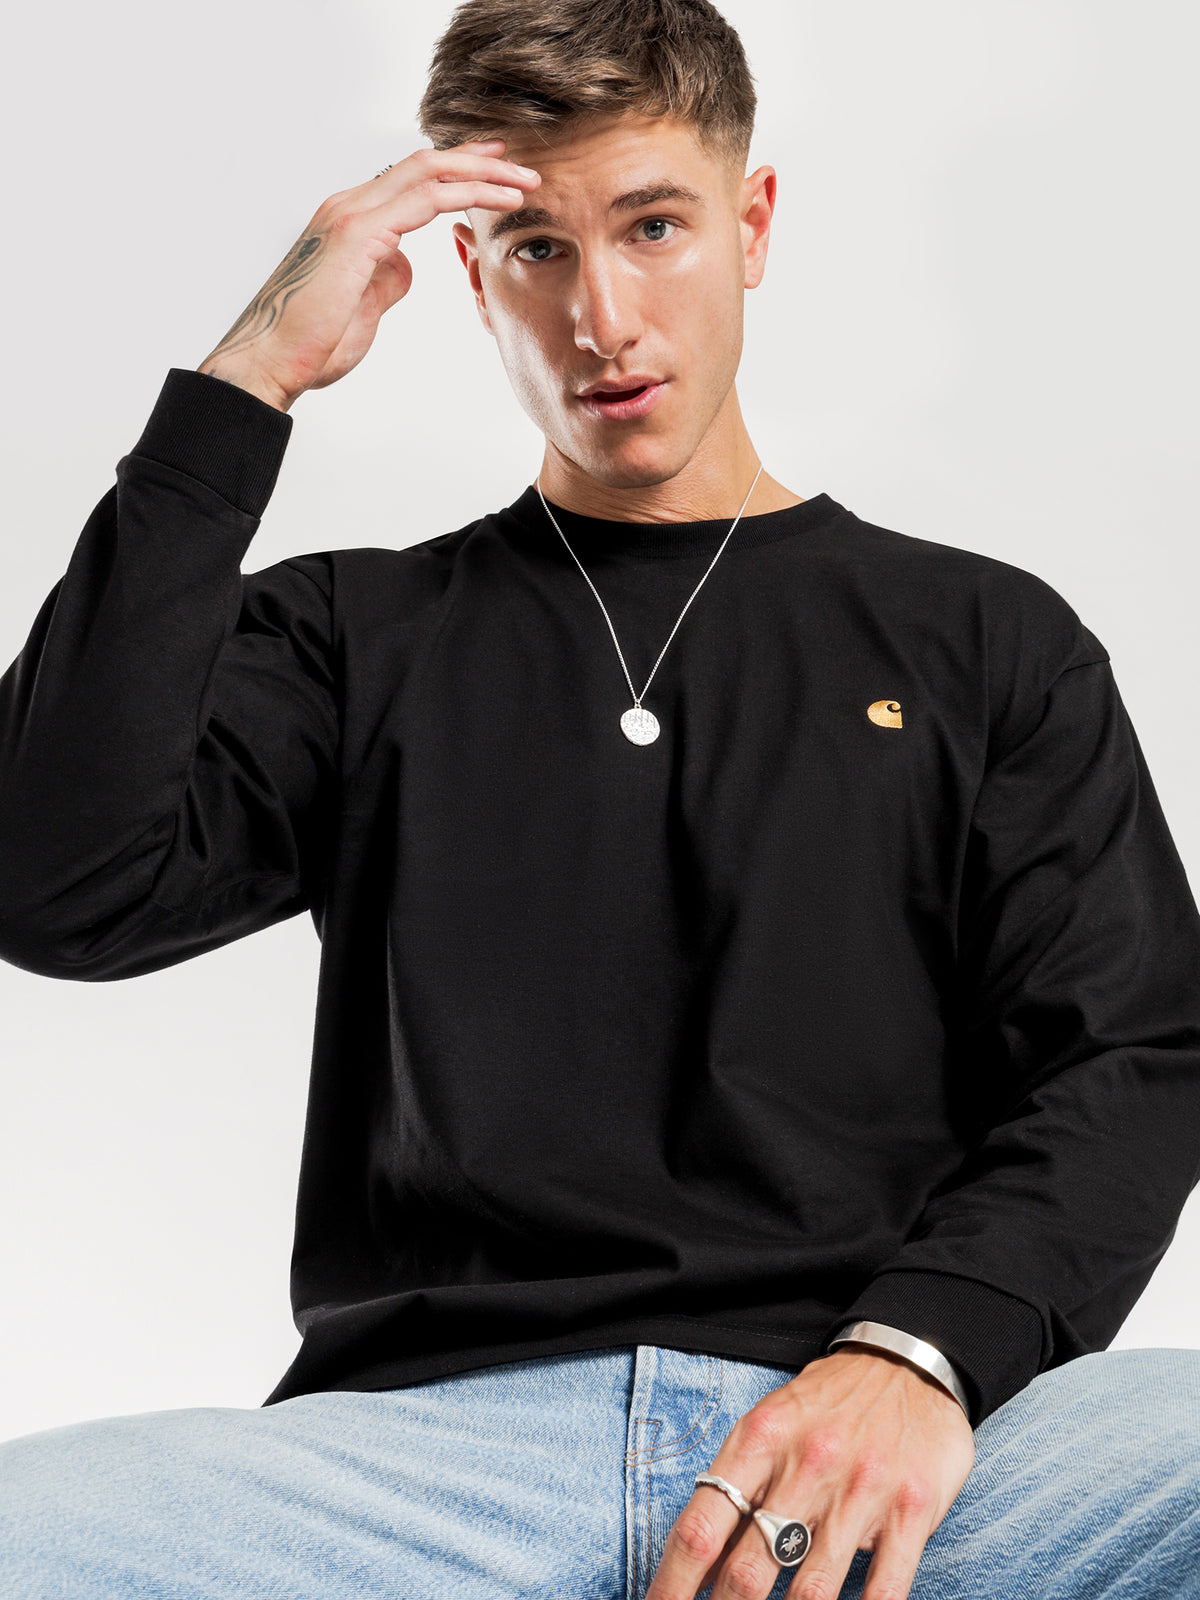 Chase Long Sleeve T-Shirt in Black